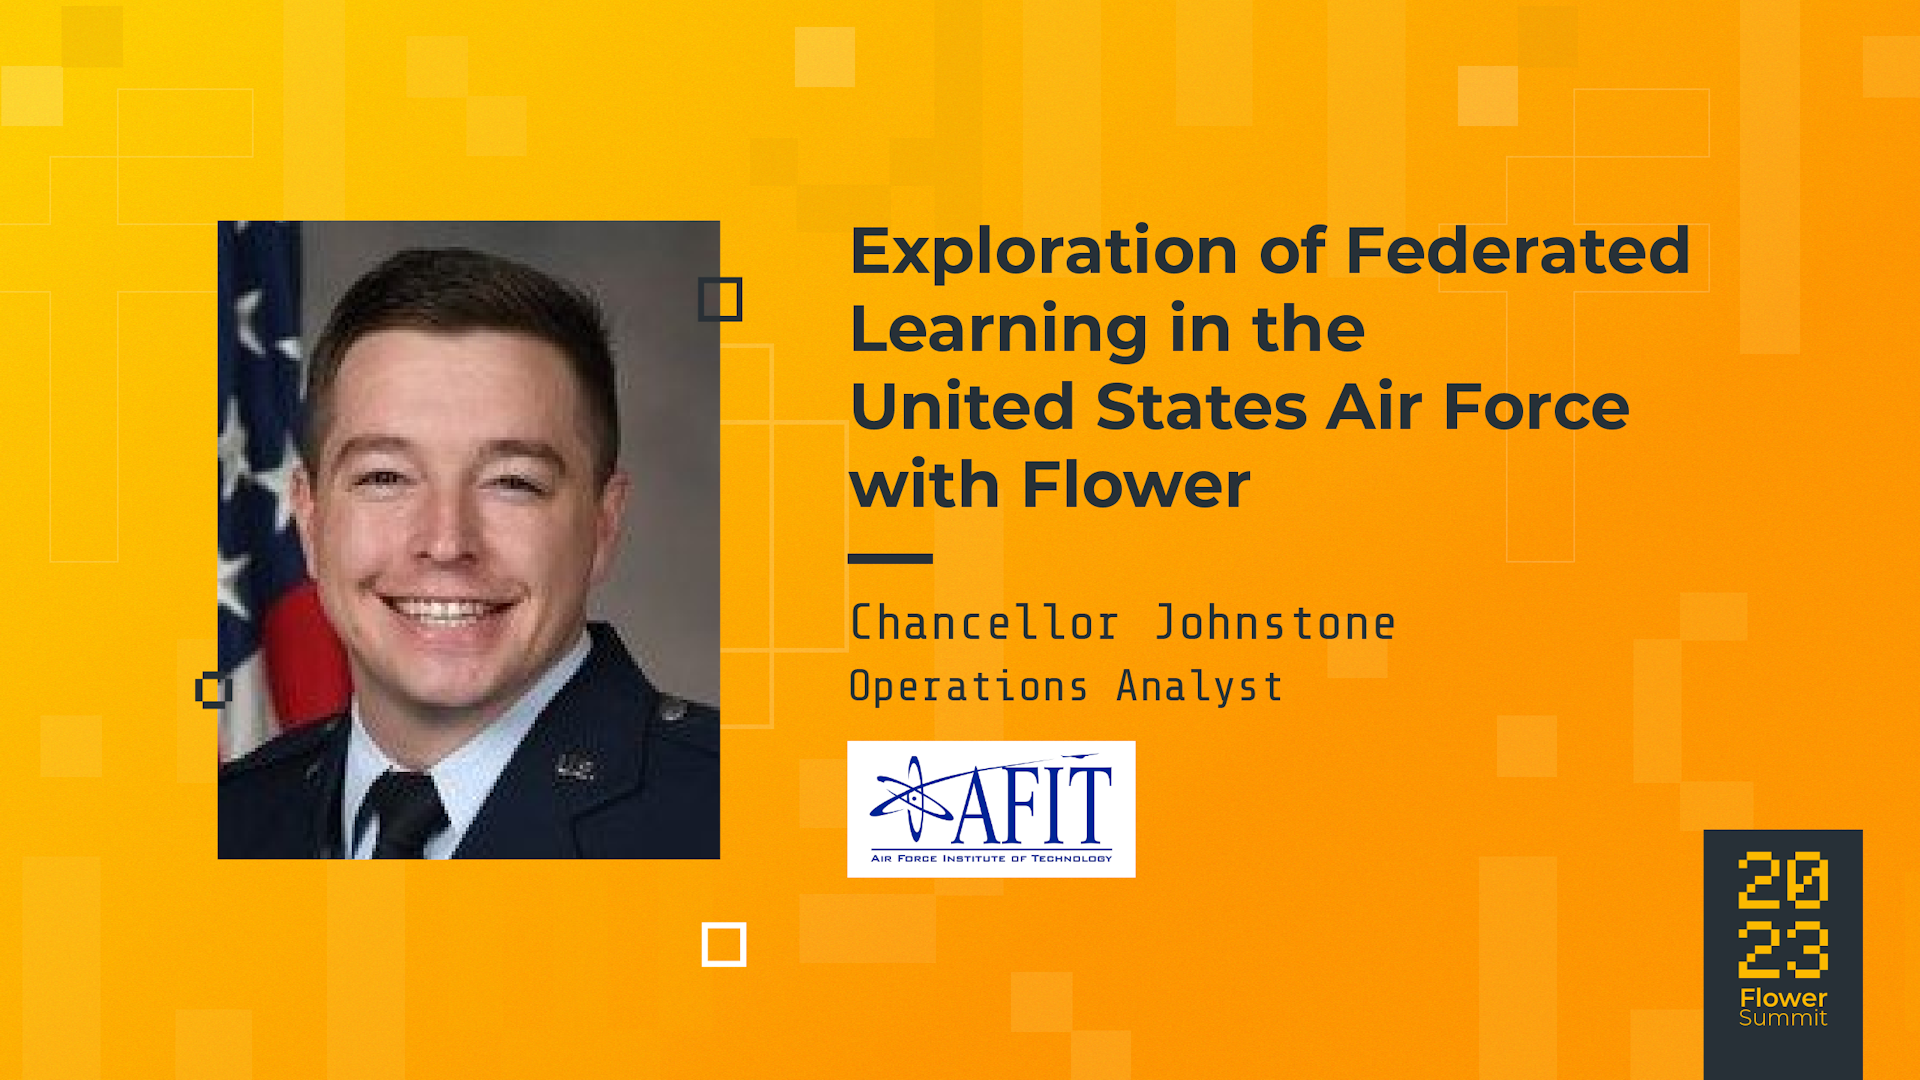 Exploration of Federated Learning in the United States Air Force with Flower